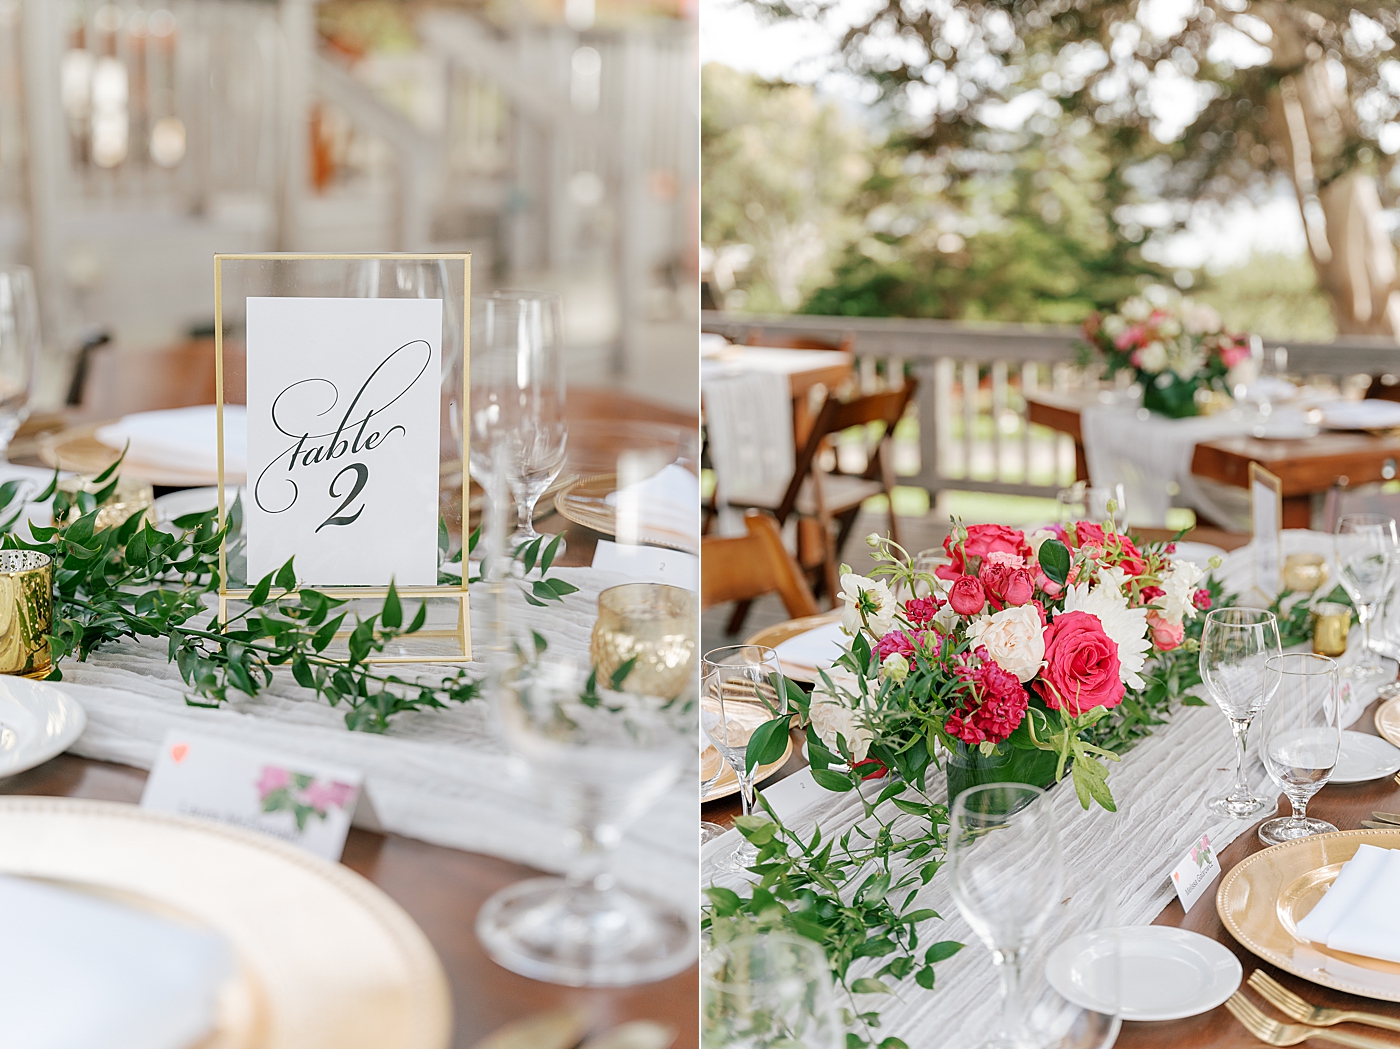 Detail of a wooden wedding dinner table with a white table runner, greenery, gold and glass table number, and a bright floral centerpiece | Image by San Diego Wedding Photographer Hope Helmuth